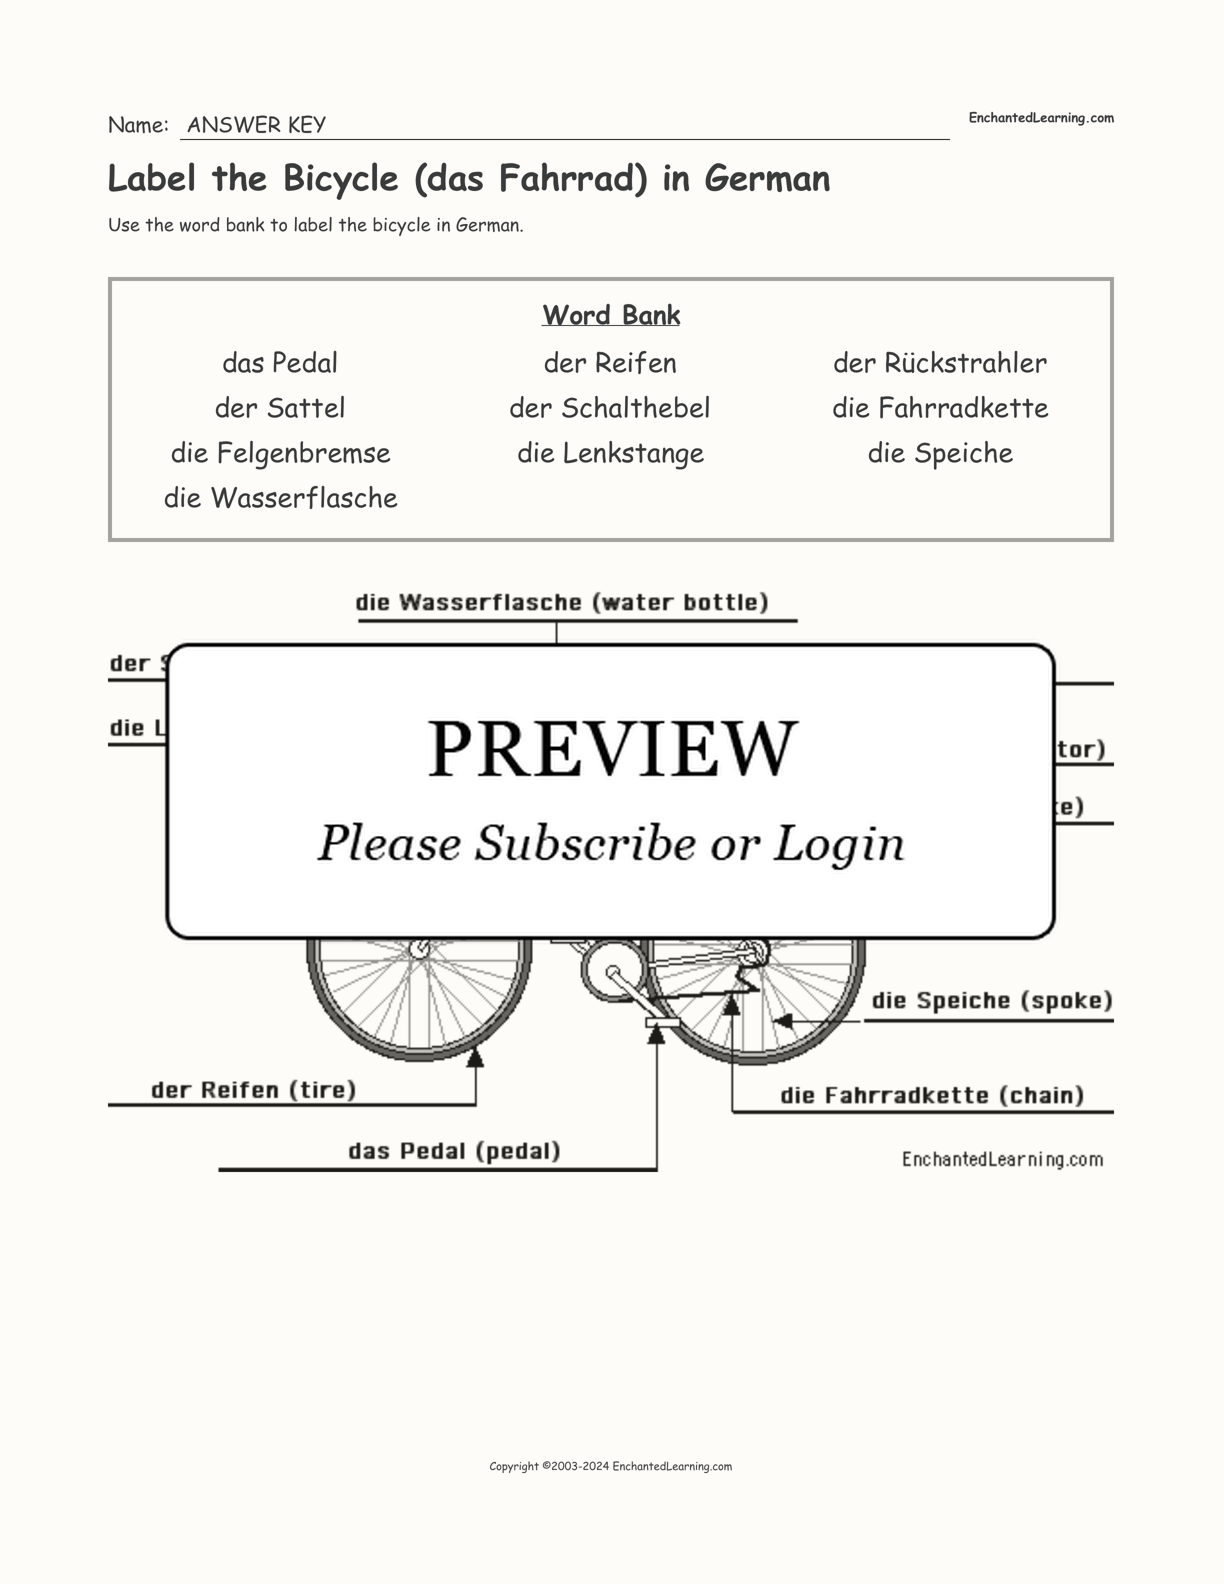 Label the Bicycle (das Fahrrad) in German interactive worksheet page 2